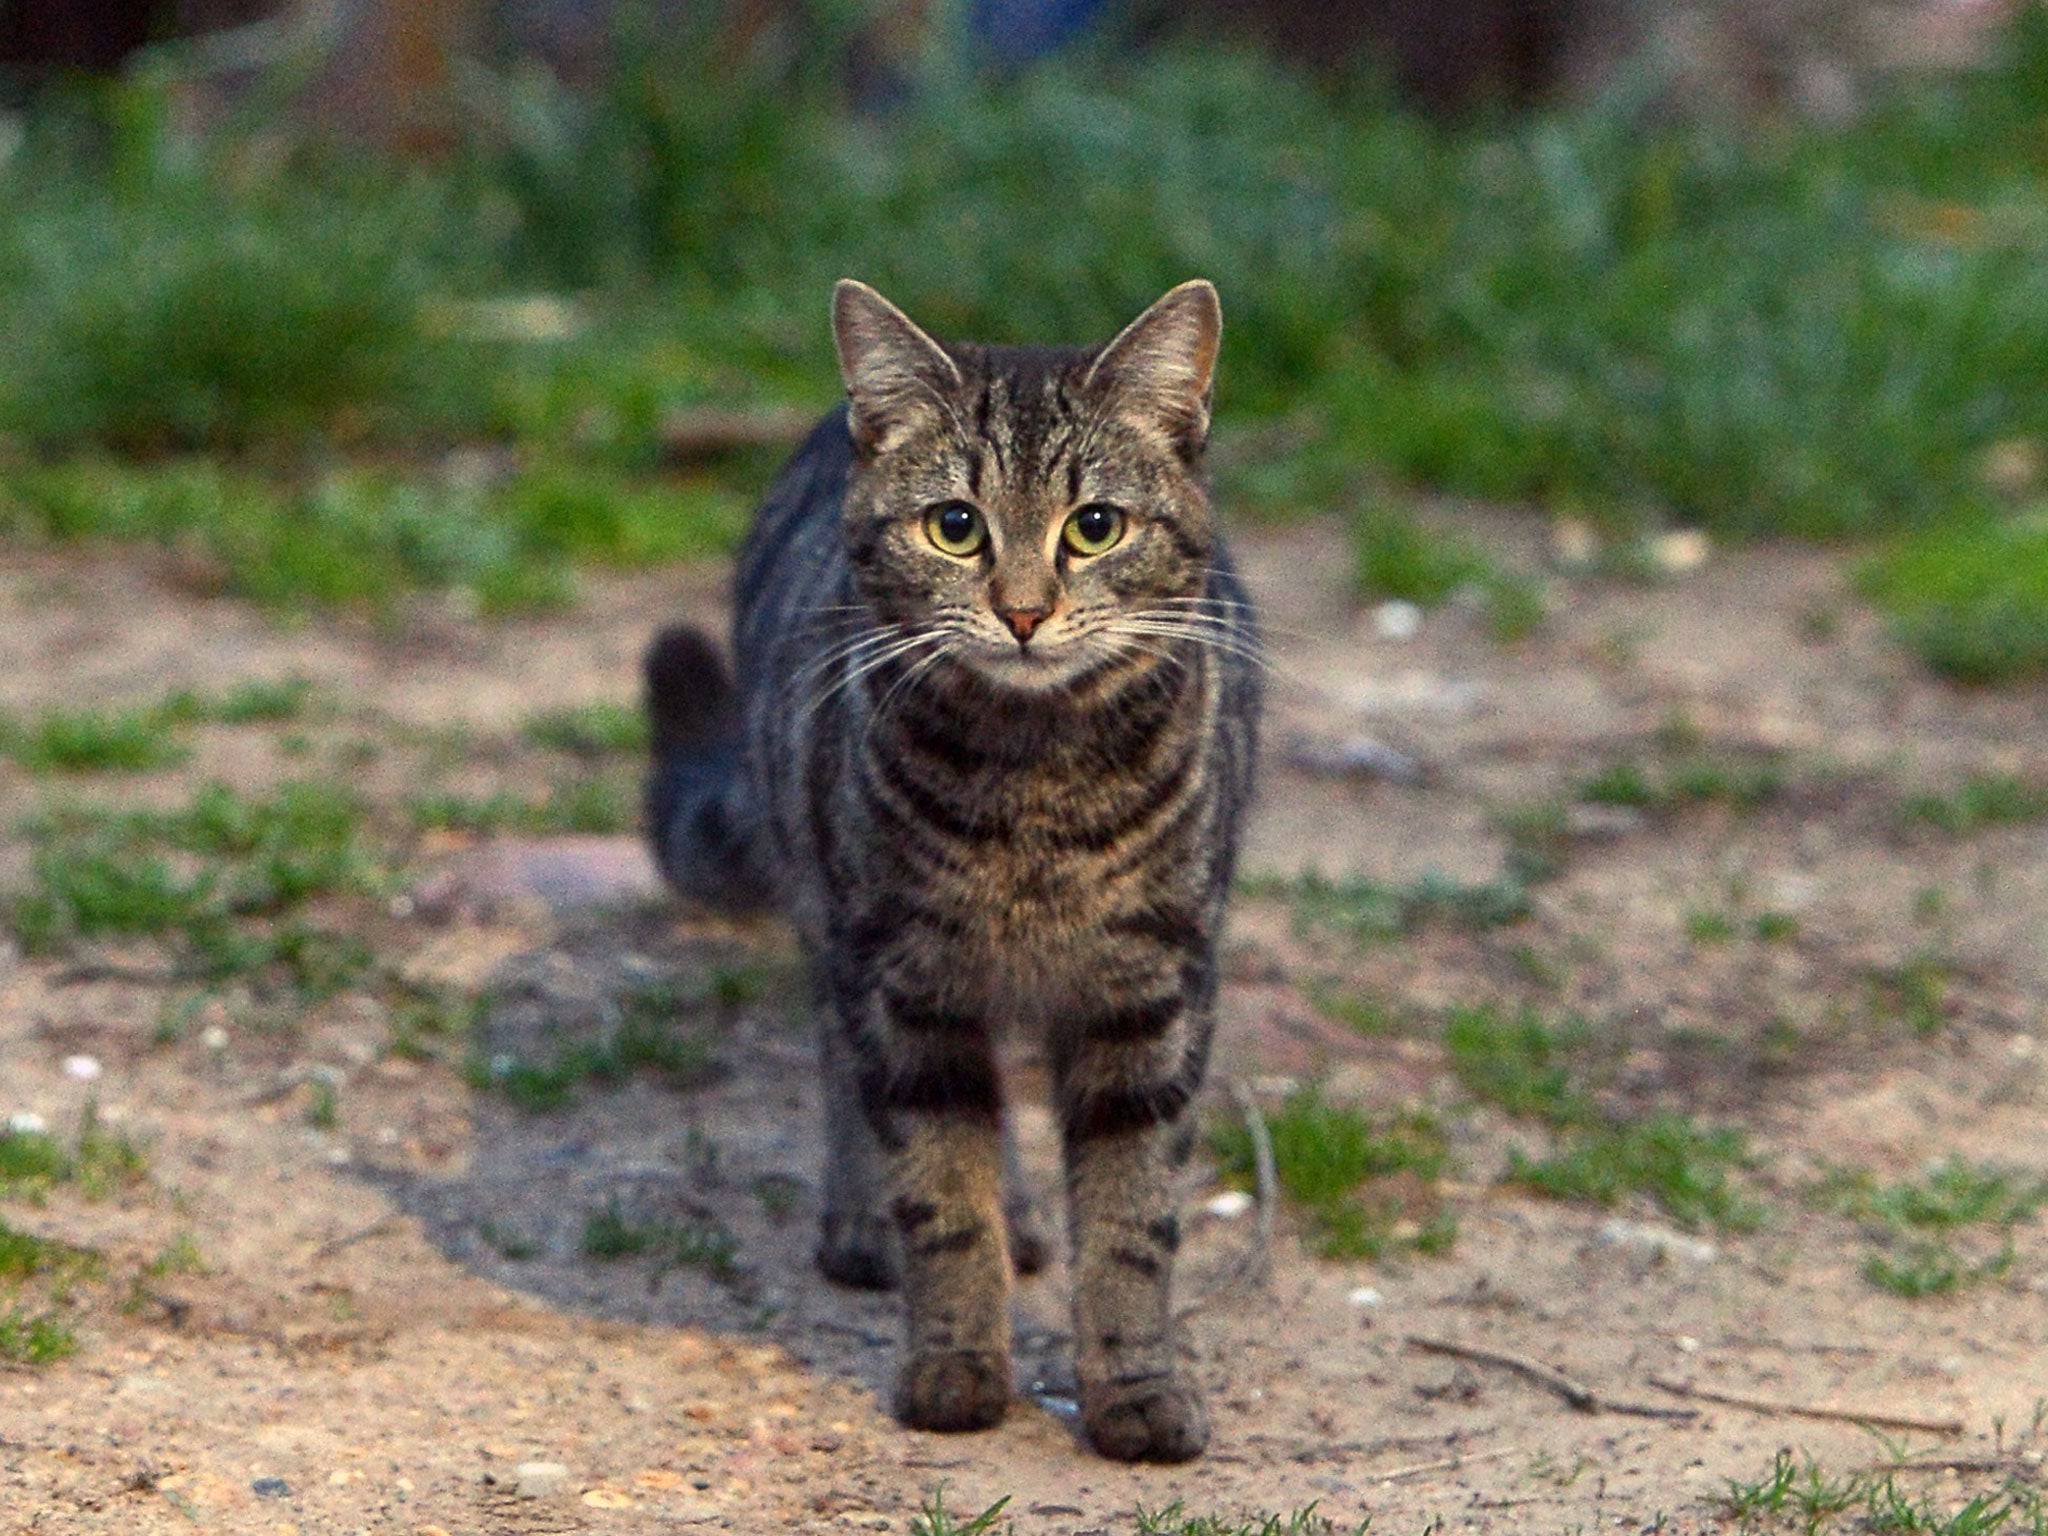 A tabby cat similar to the pet that went missing in Australia for 7 weeks